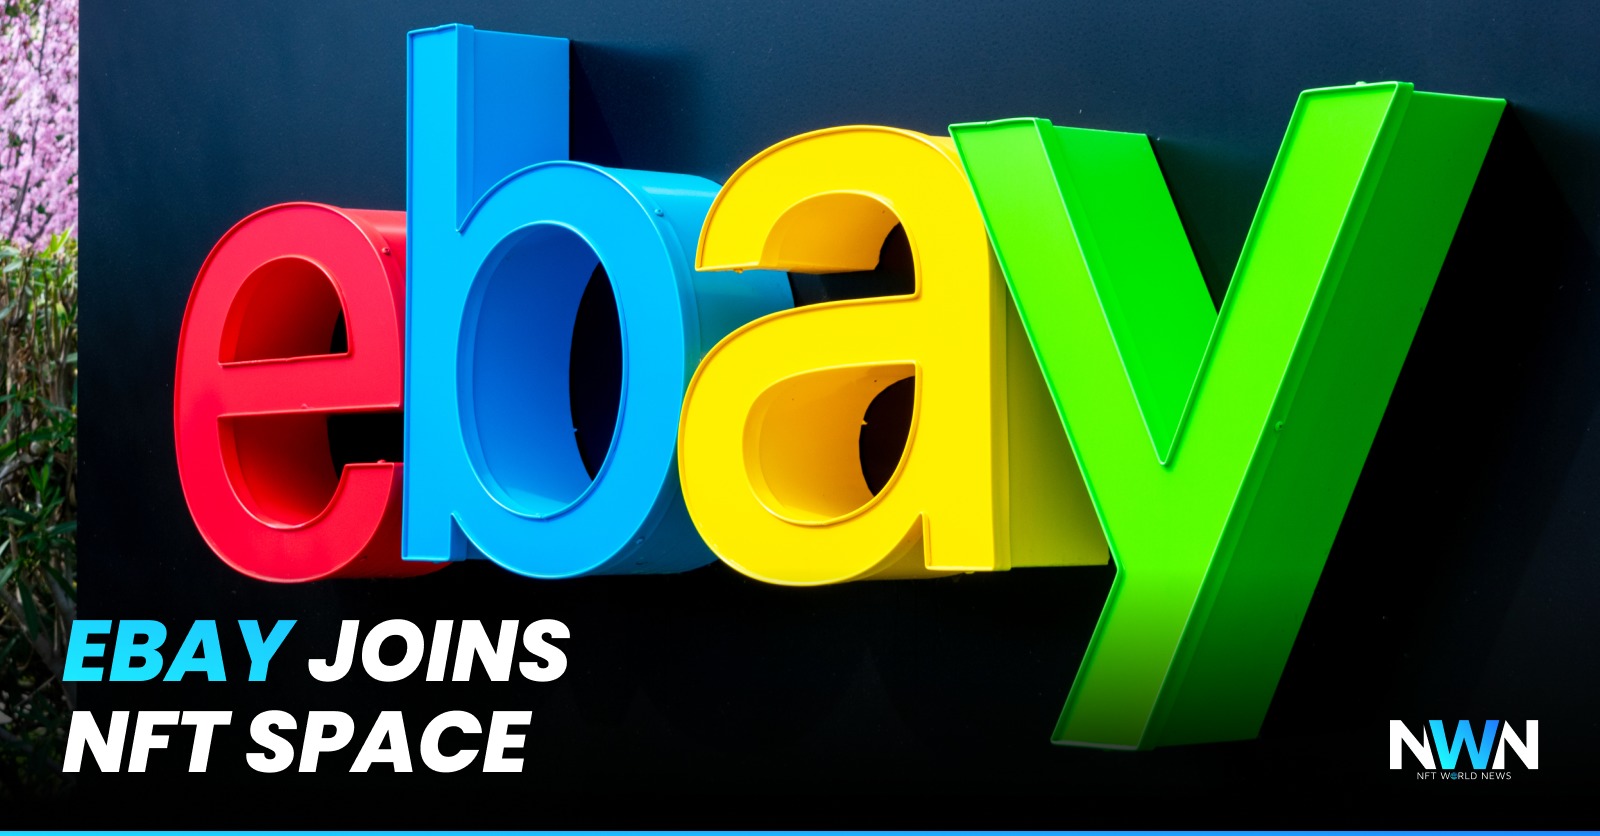 eBay jumps into NFT market, launching first NFTs